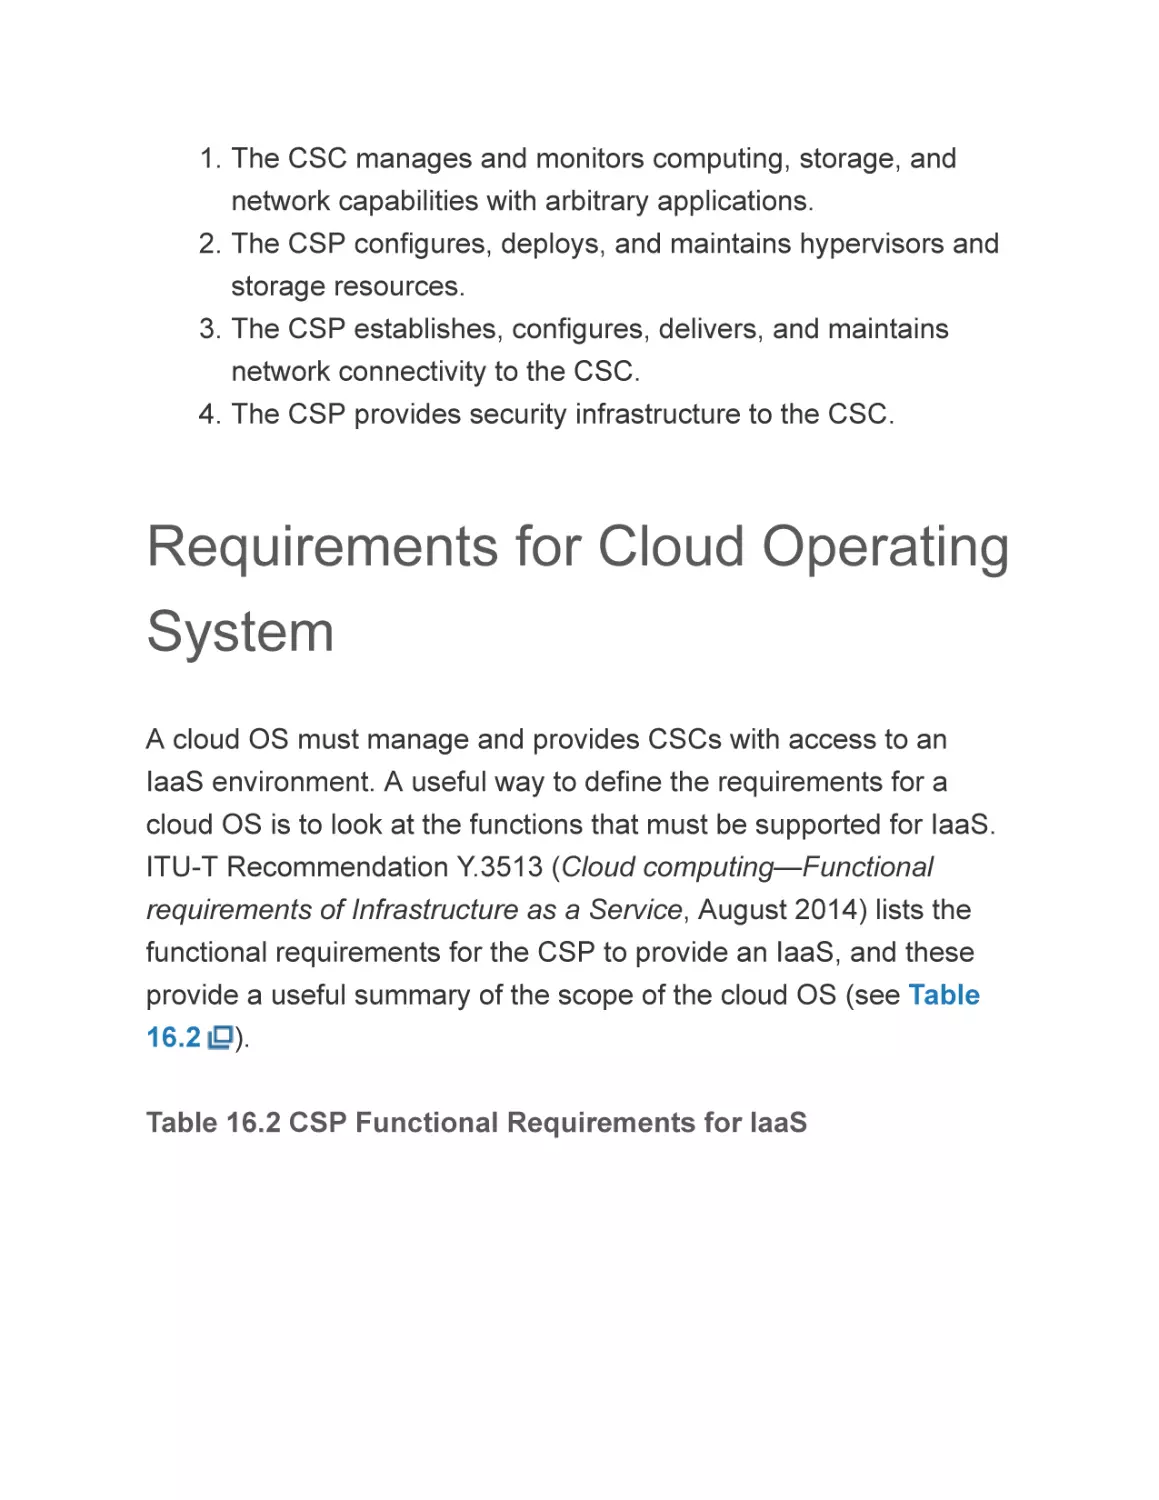 Requirements for Cloud Operating System